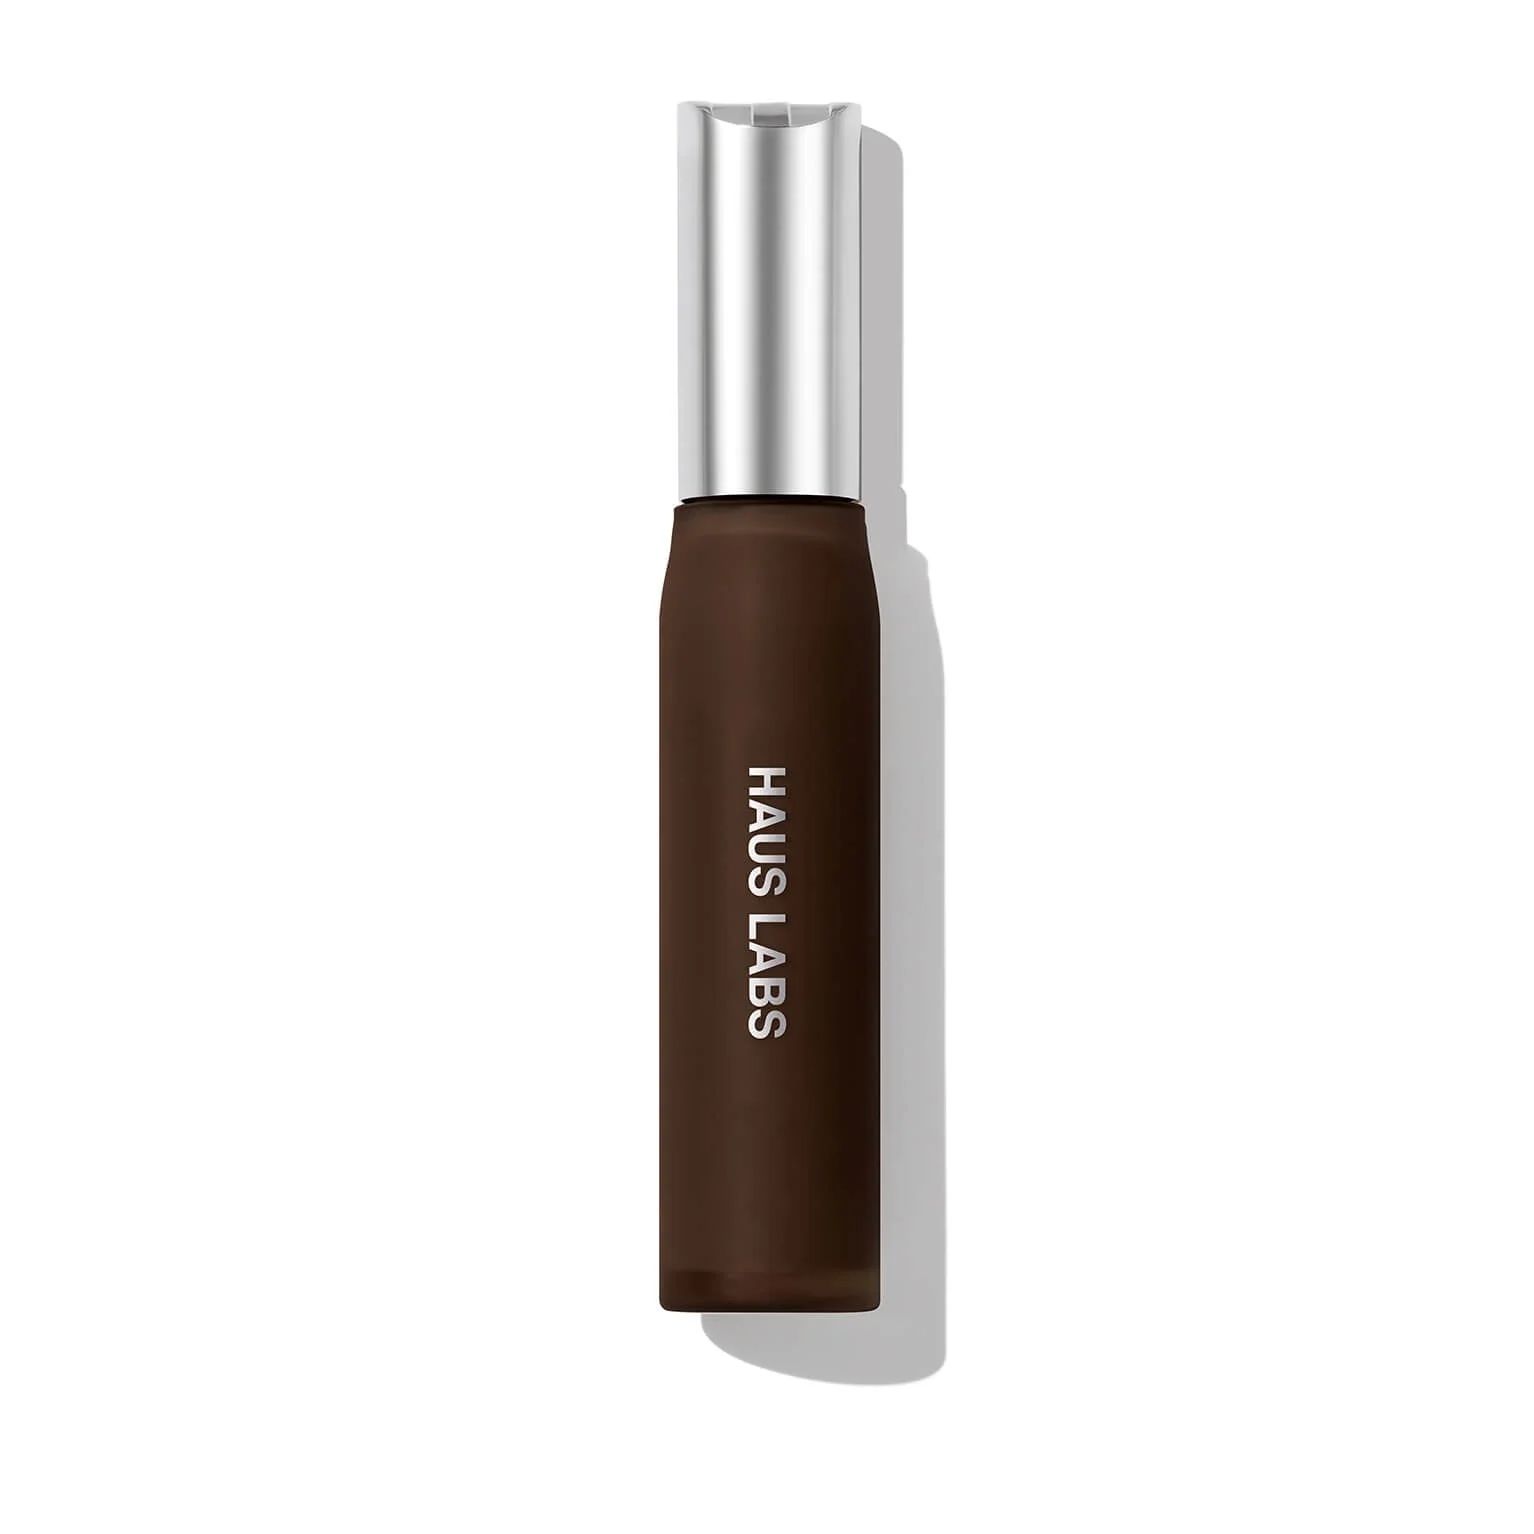 TRICLONE™ SKIN TECH HYDRATING + DE-PUFFING CONCEALER | Haus Labs